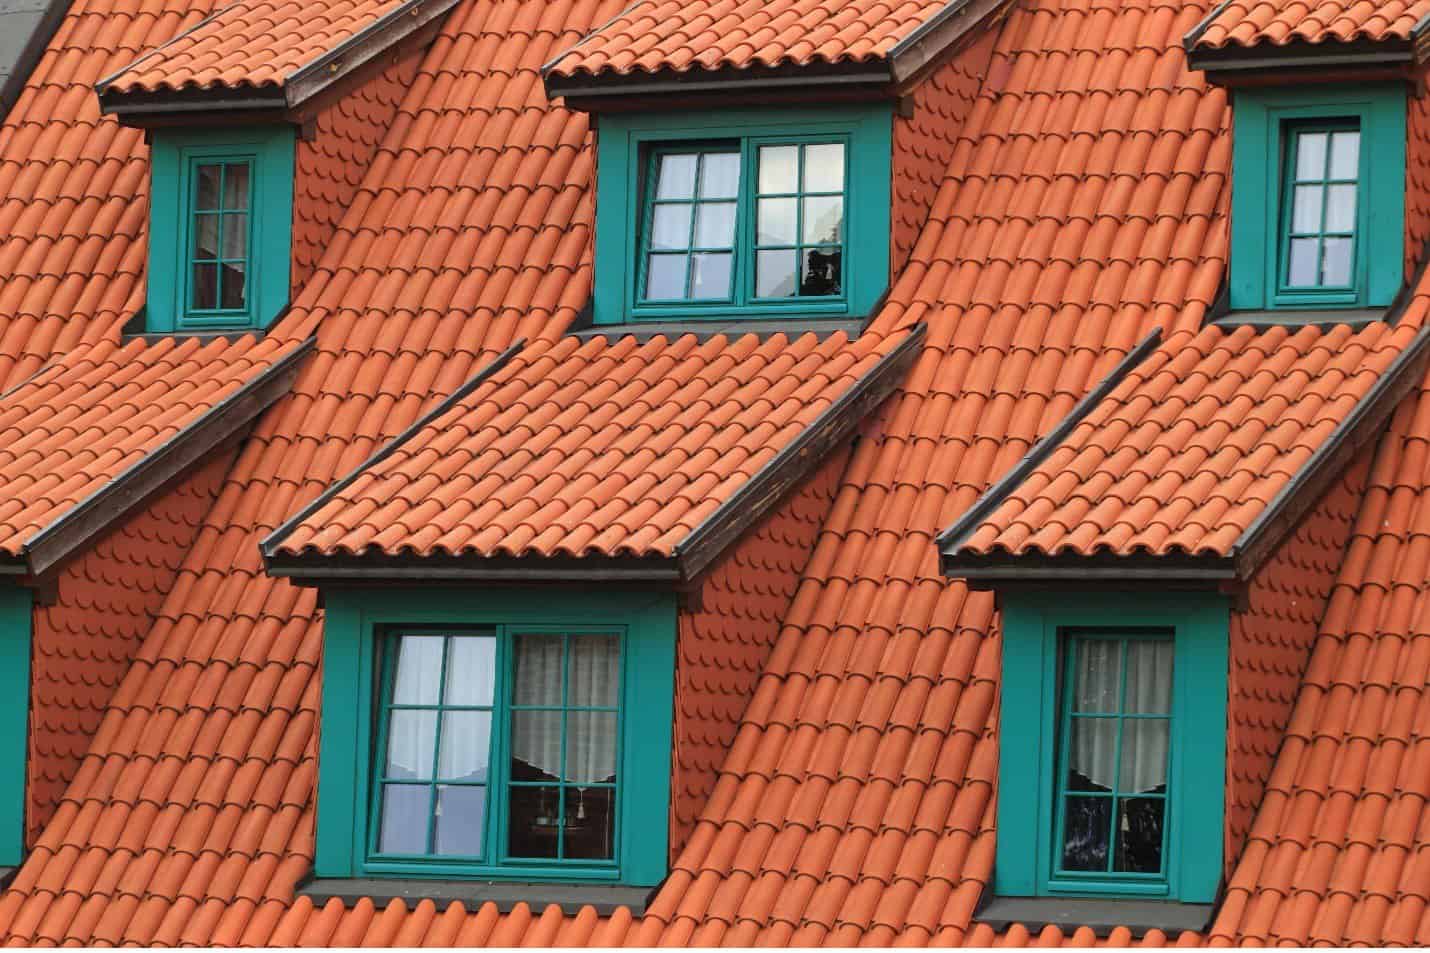 Top Three Reasons to Consider a Roofing Contractor